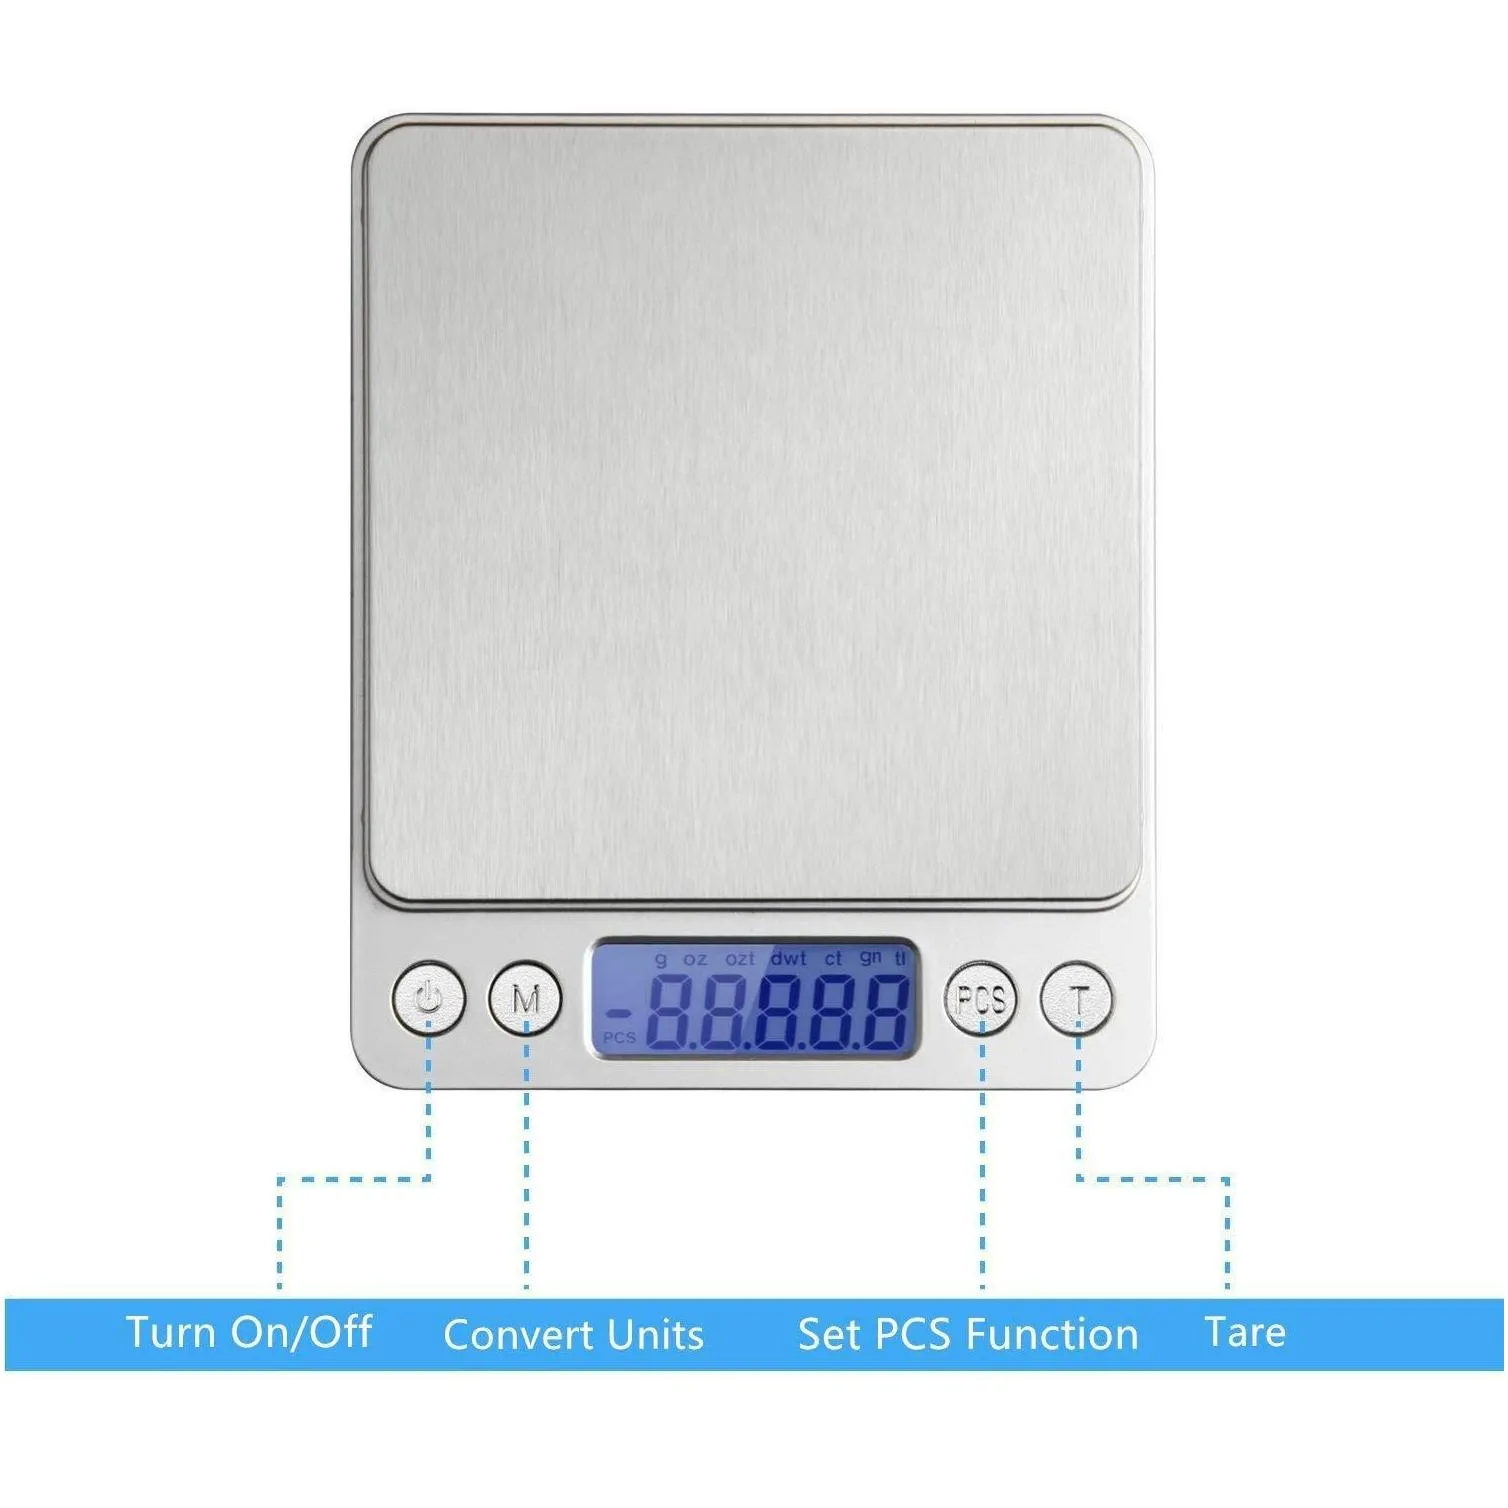 Weighing Scales Wholesale 1000G/0.1G Lcd Portable Mini Electronic Digital Scales Pocket Case Postal Kitchen Jewelry Weight Nce Drop De Dhlpq